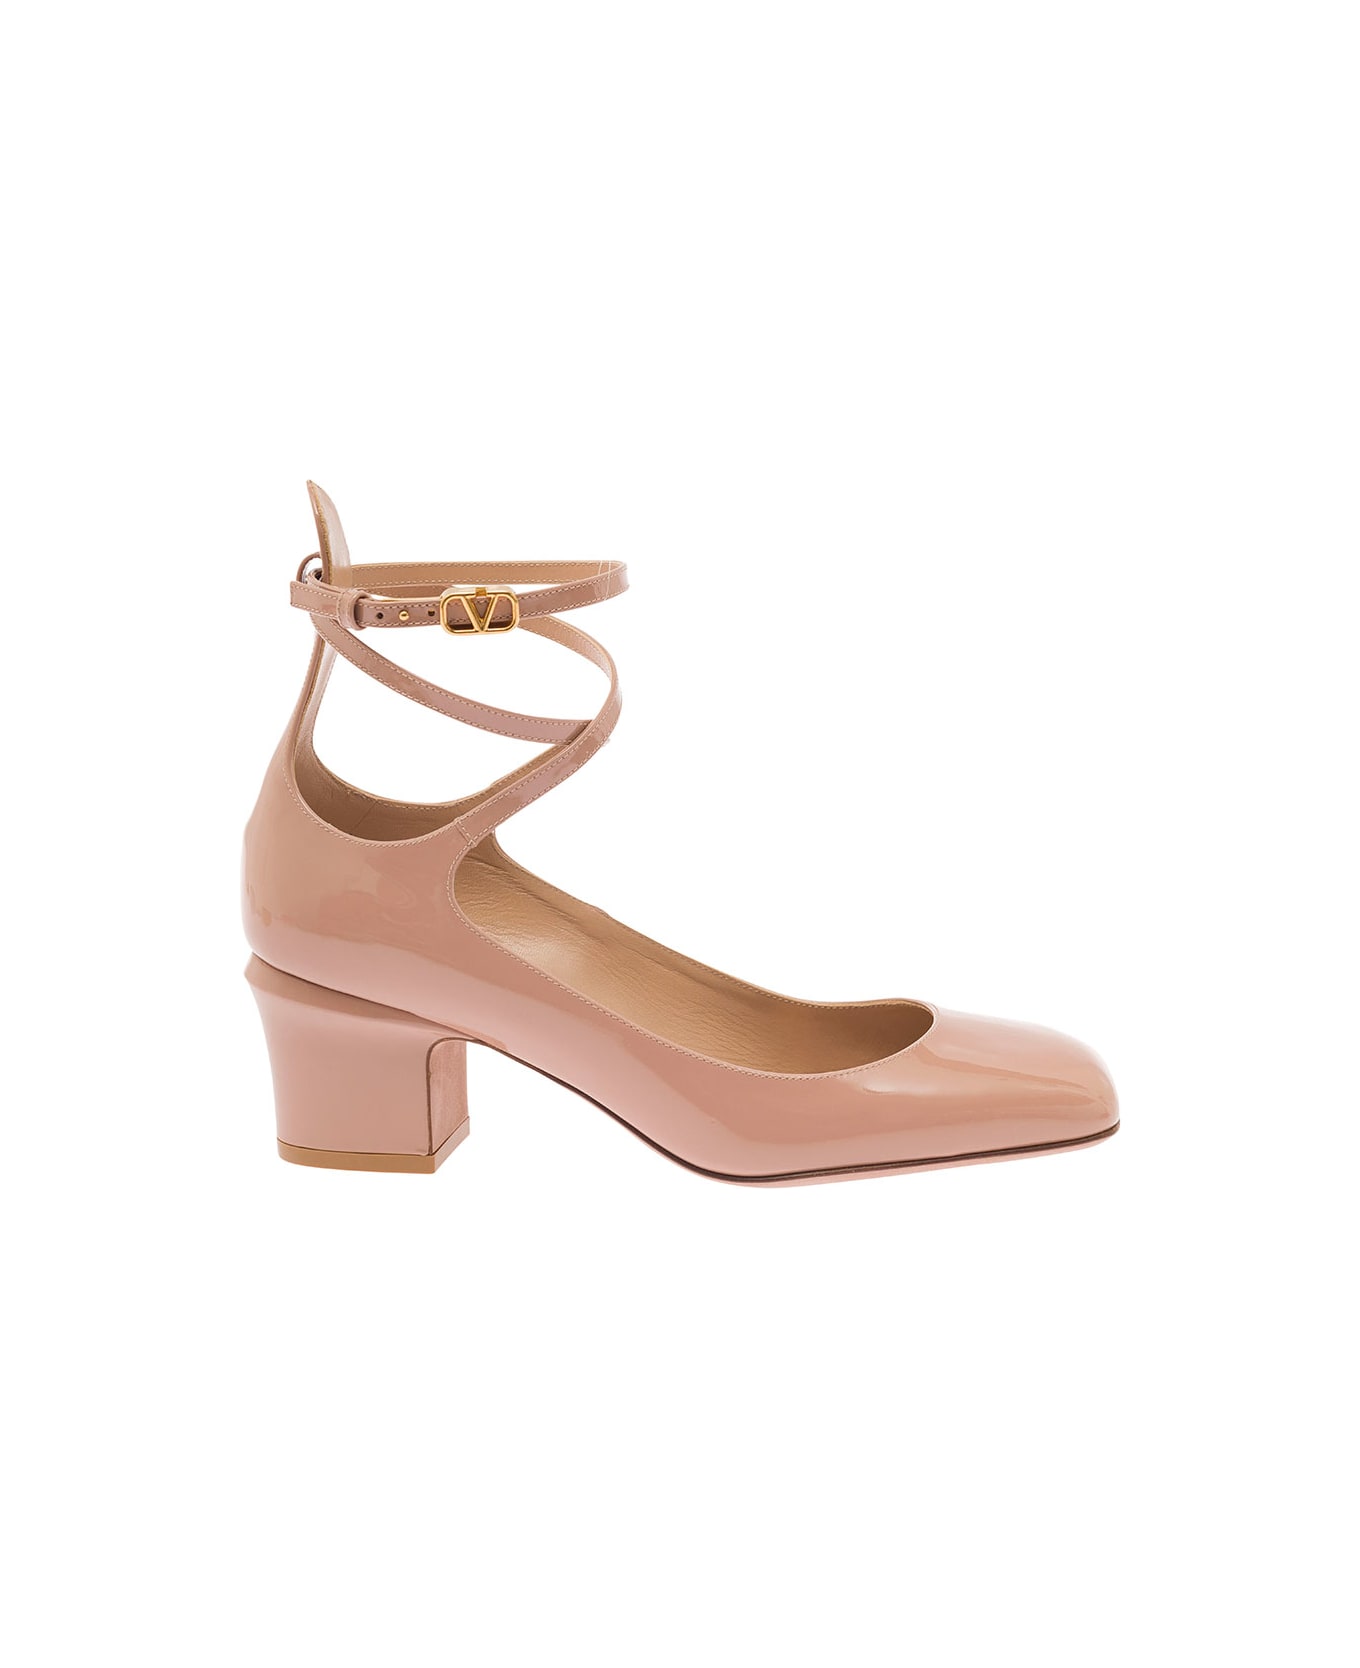 Valentino Garavani Tan-go' Bege Dècolletè With V-logo Buckle In Patent Leather Woman - Pink ハイヒール